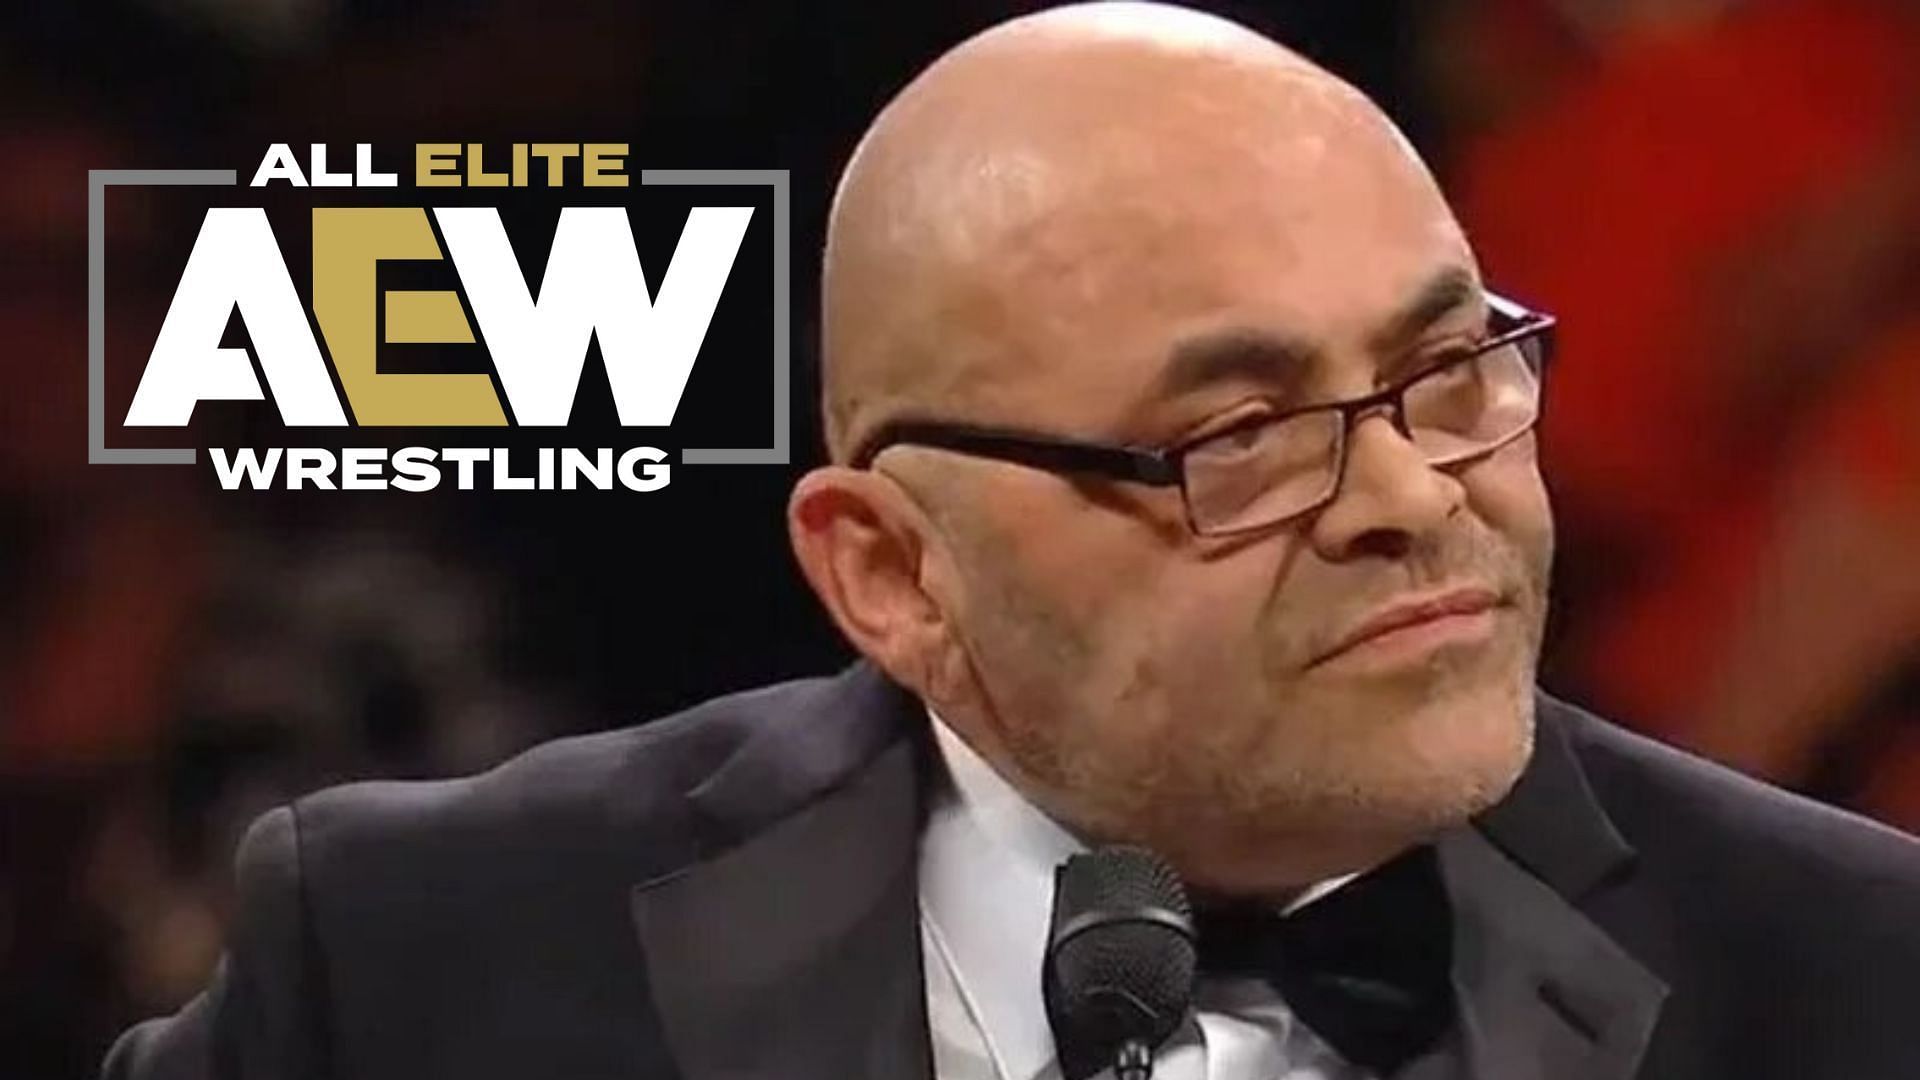 Konnan is perplexed by the booking of a top AEW star.